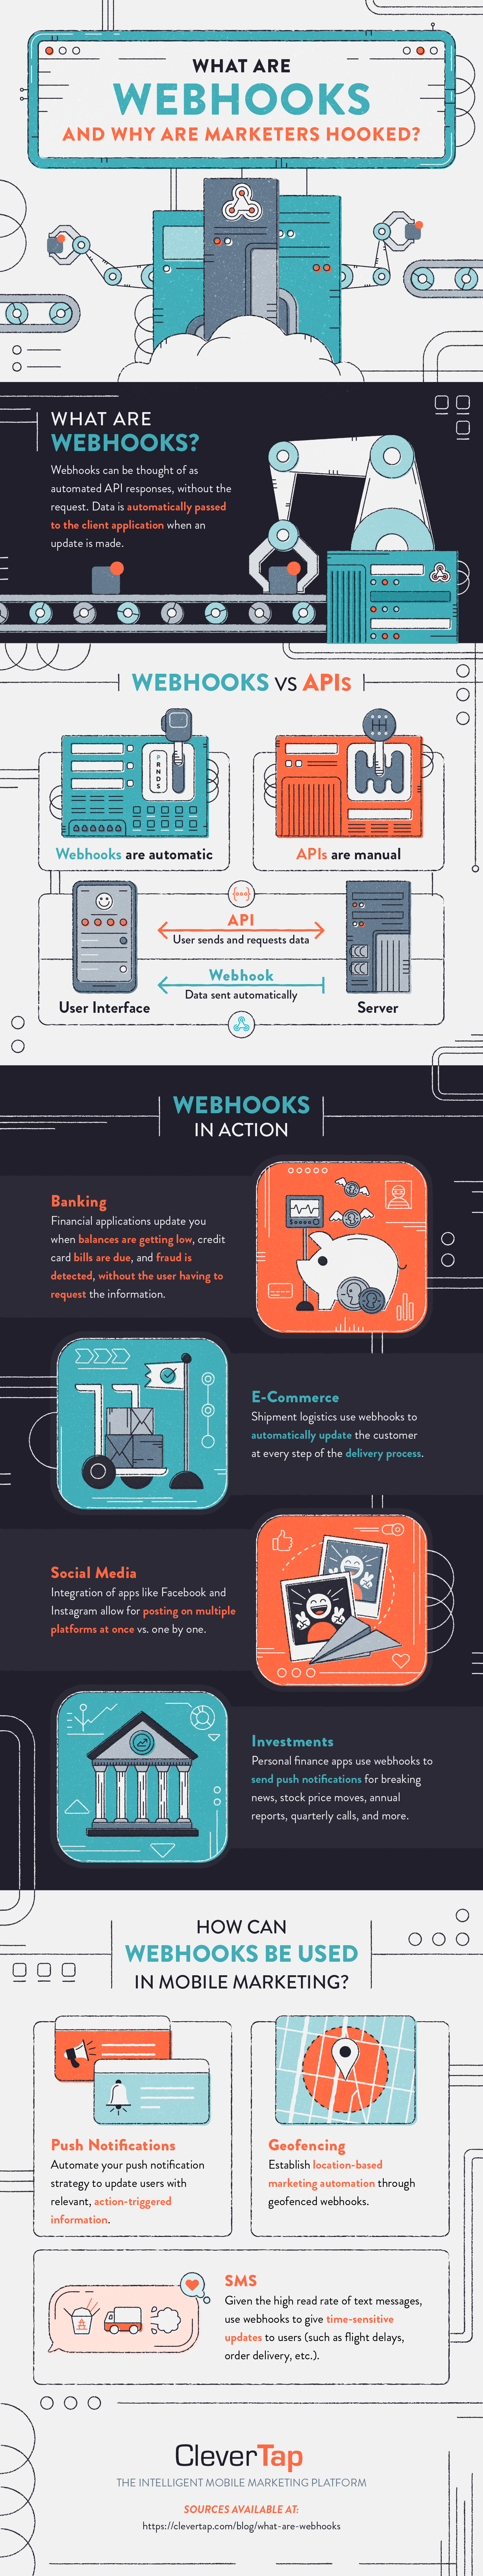 what are webhooks full infographic 